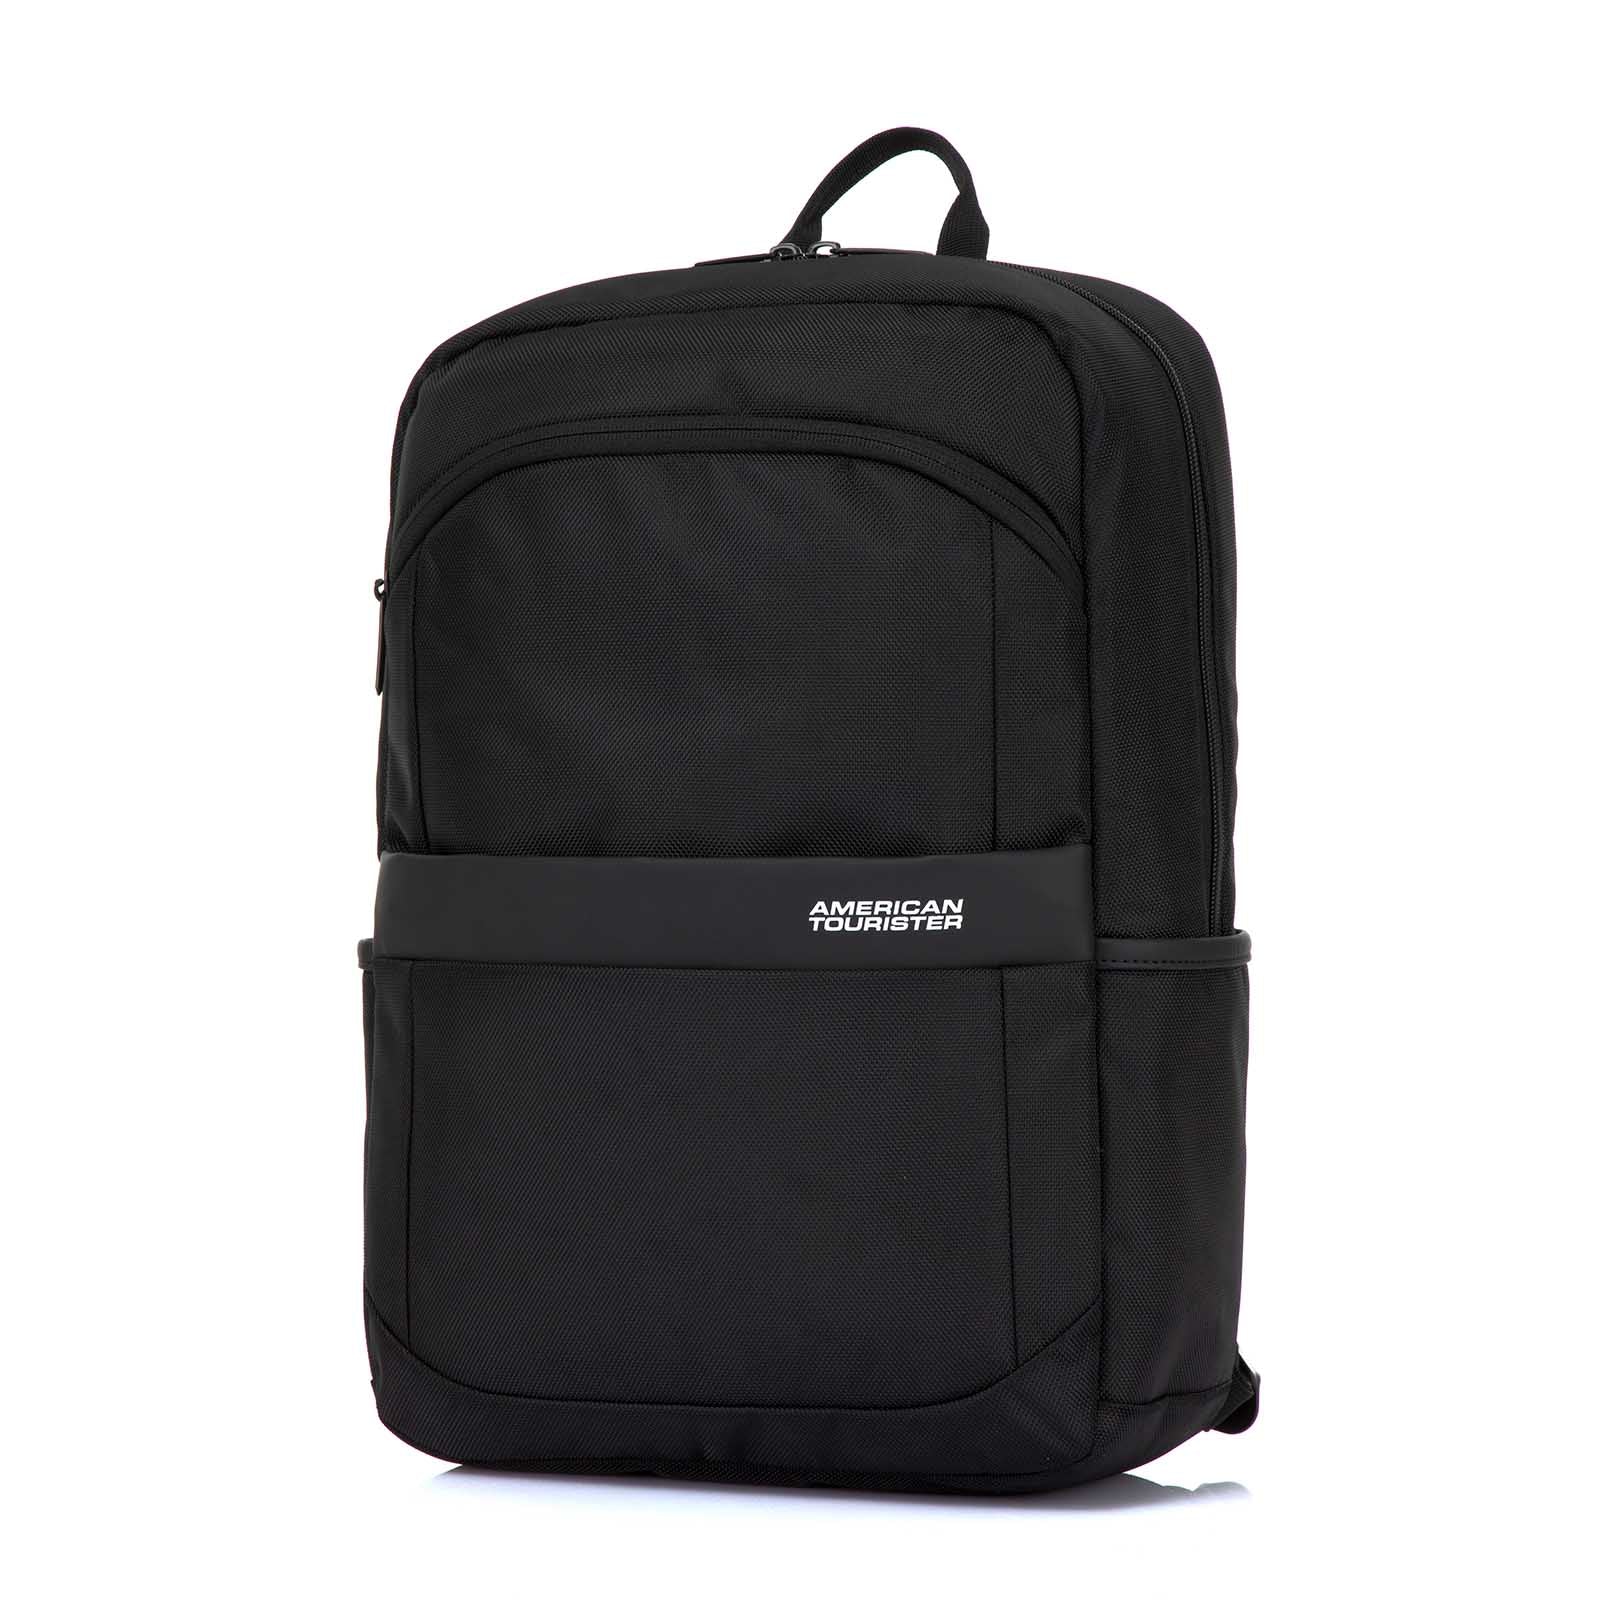 American-Tourister-Kamden-15-Inch-Laptop-Backpack-Black-Front-Angle